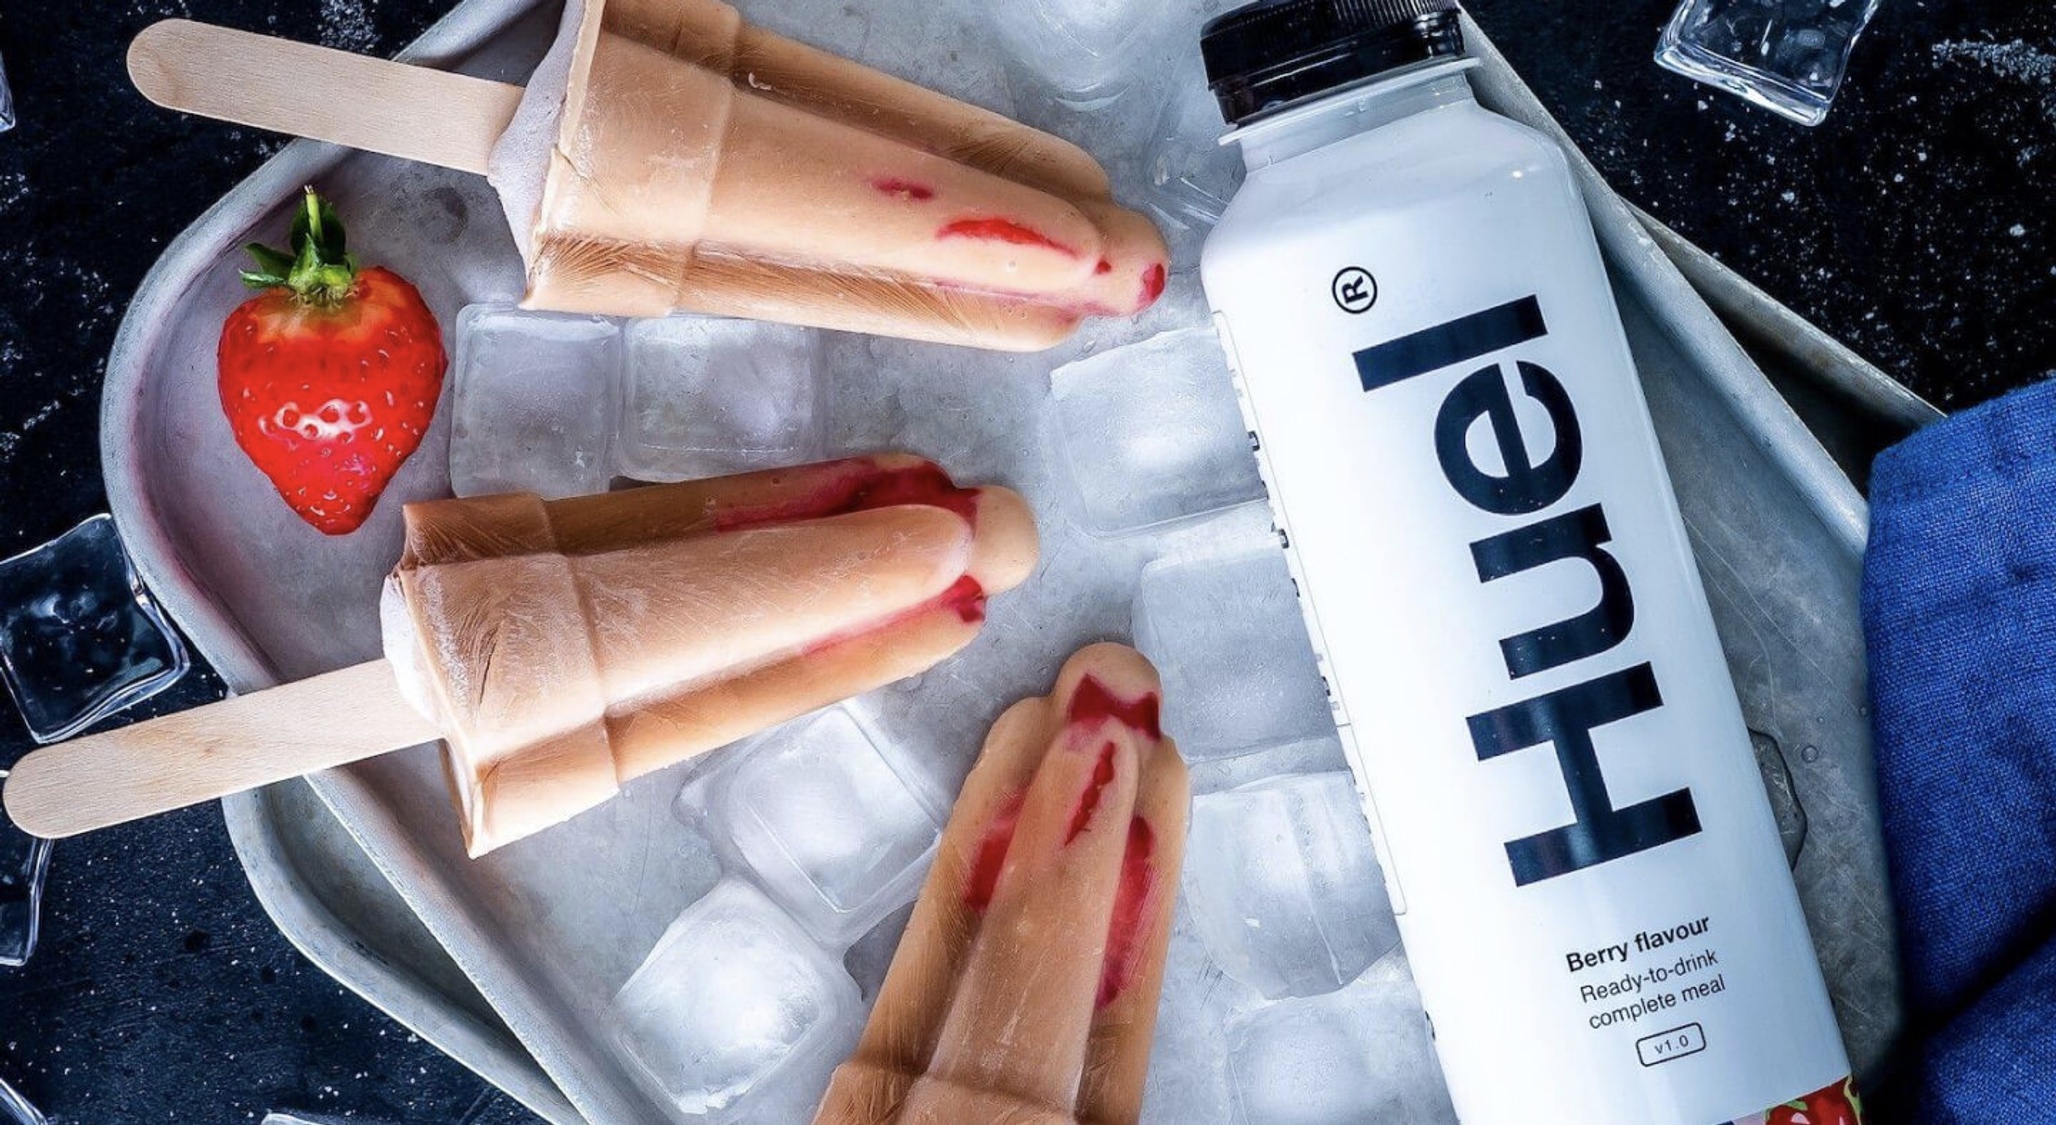 Huel berry flavour meals in the form of popsicles.